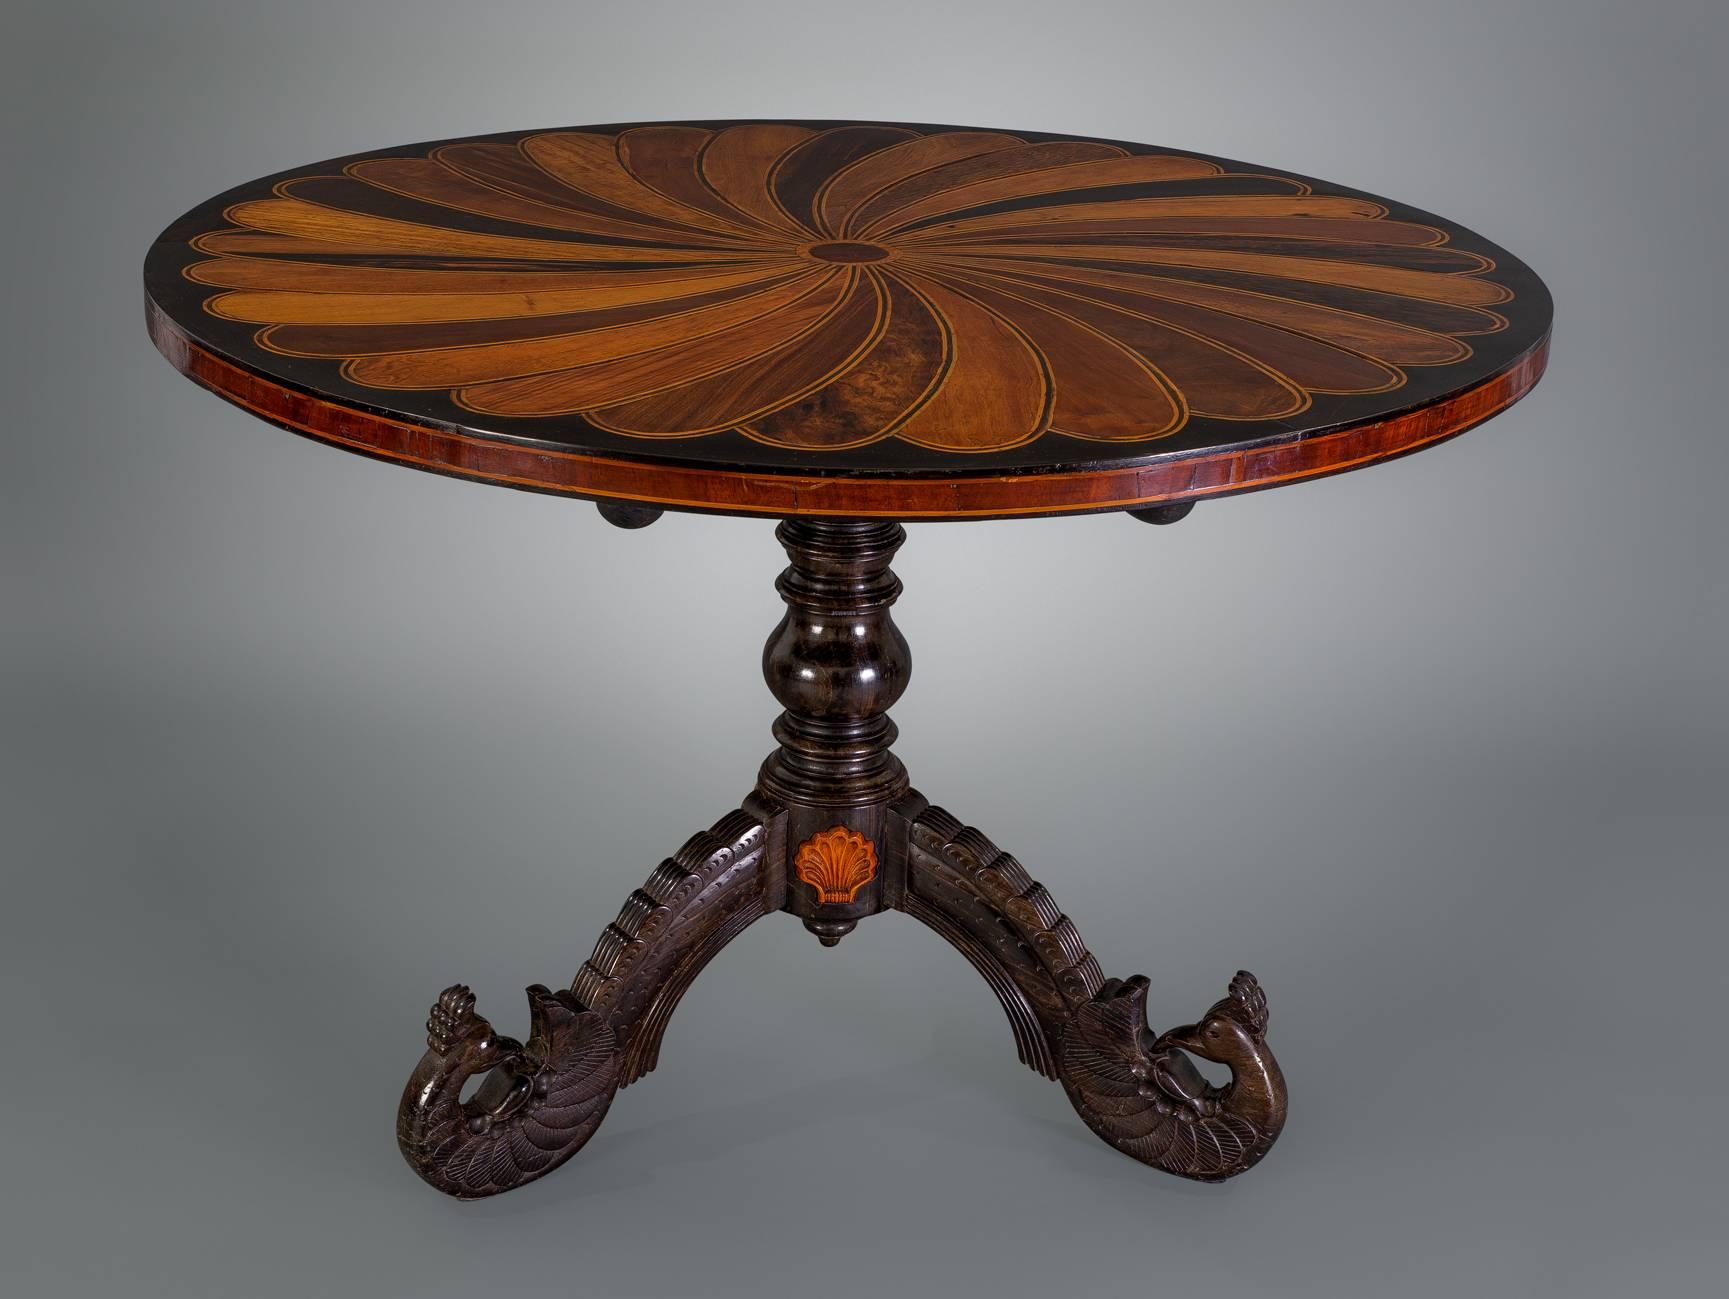 A particularly fine example of these striking tables from the Galle District of what is now Sri Lanka. The tilt-top with a swirling design in multiple specimen woods above a twined baluster standard, raised on stepped and carved cabriole legs